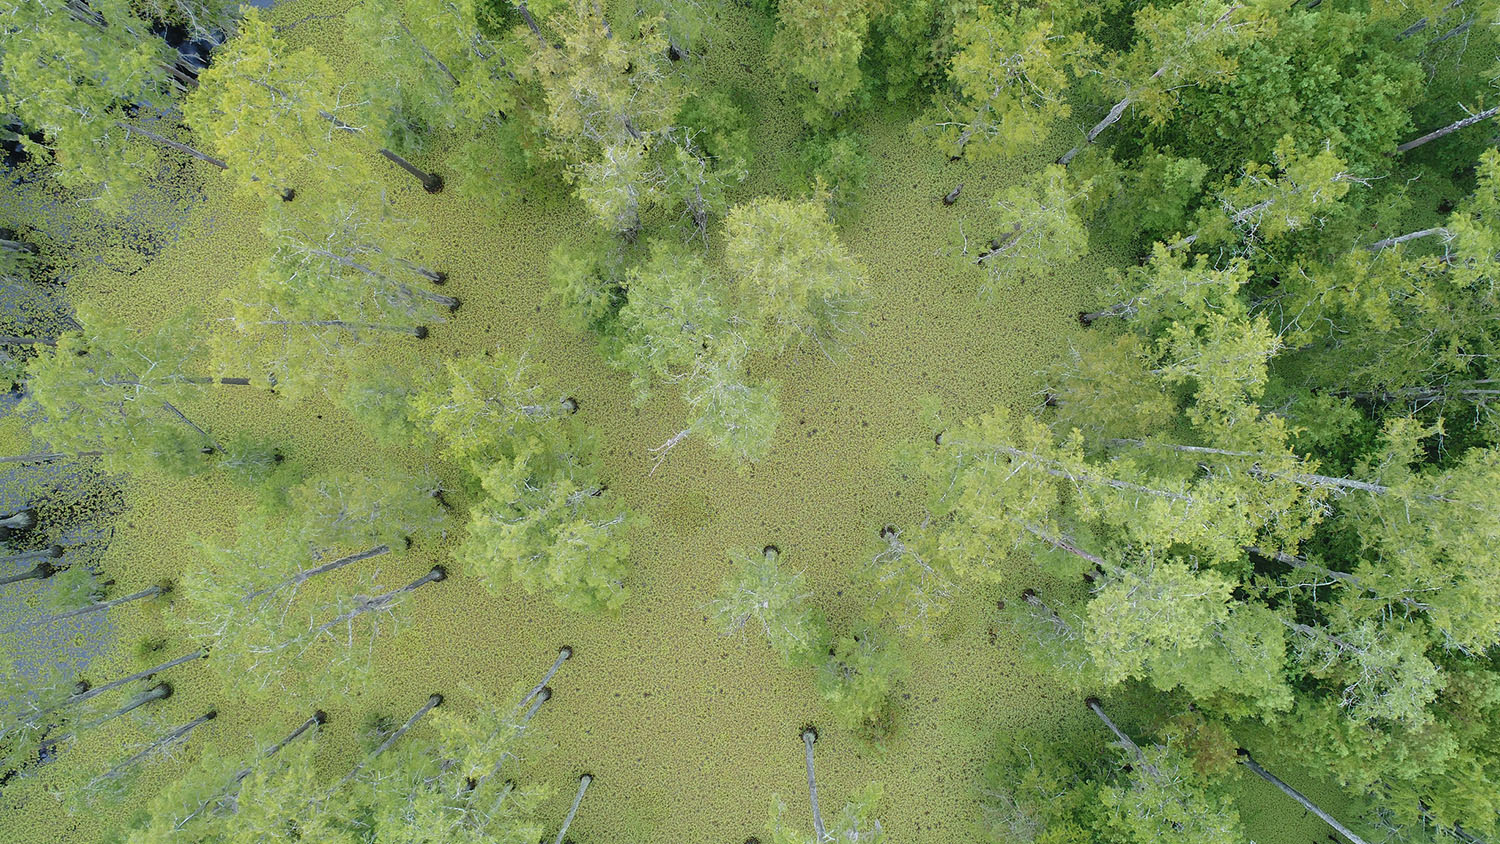 aerial view of a wetland forest shows many green trees and large patches of floating weed in the water